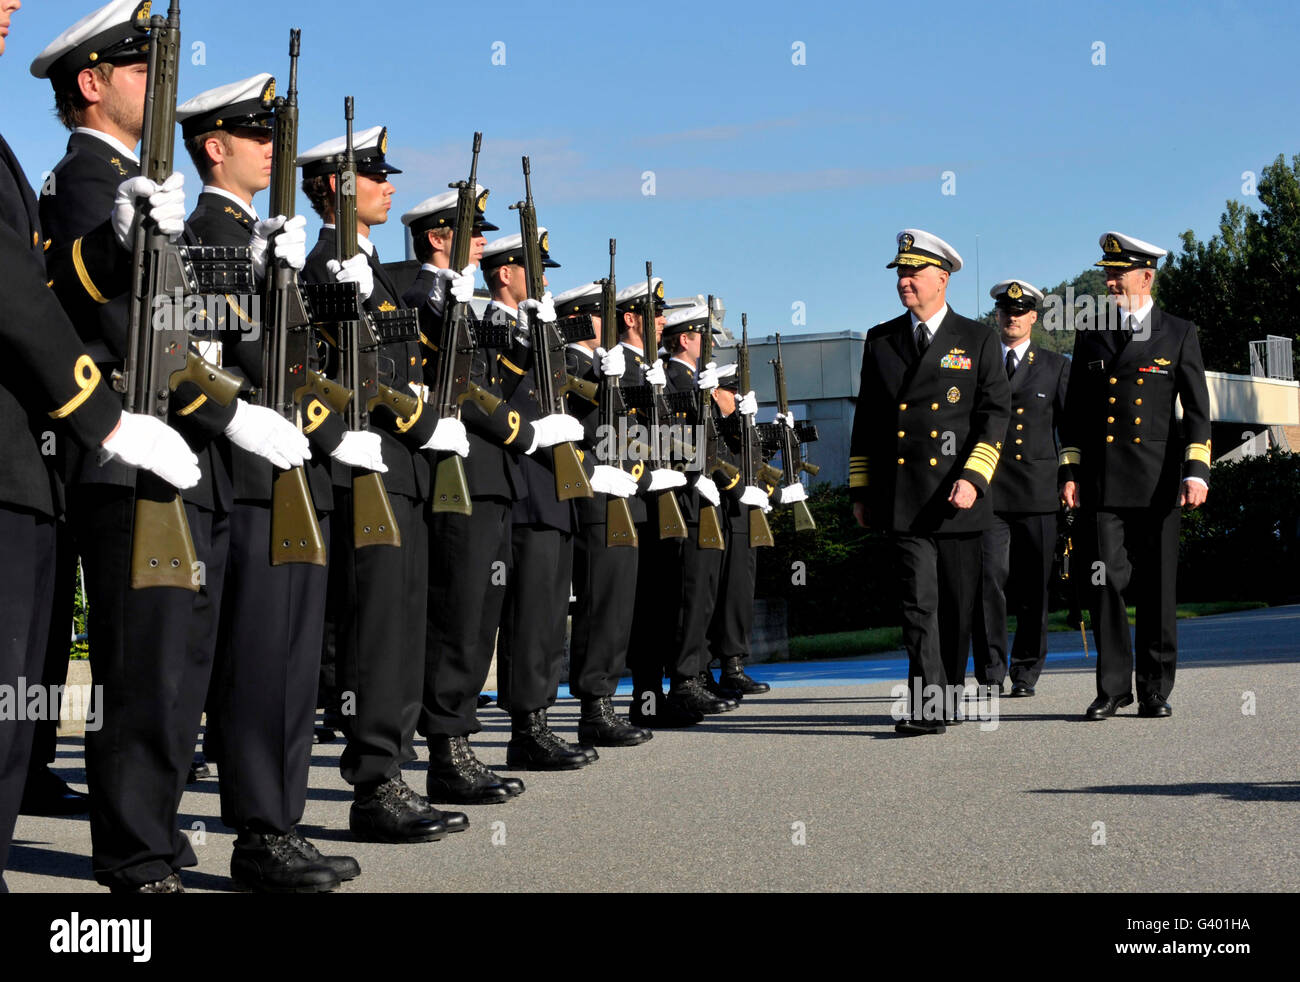 Cadets of the Royal Norwegian Naval Academy. Stock Photo